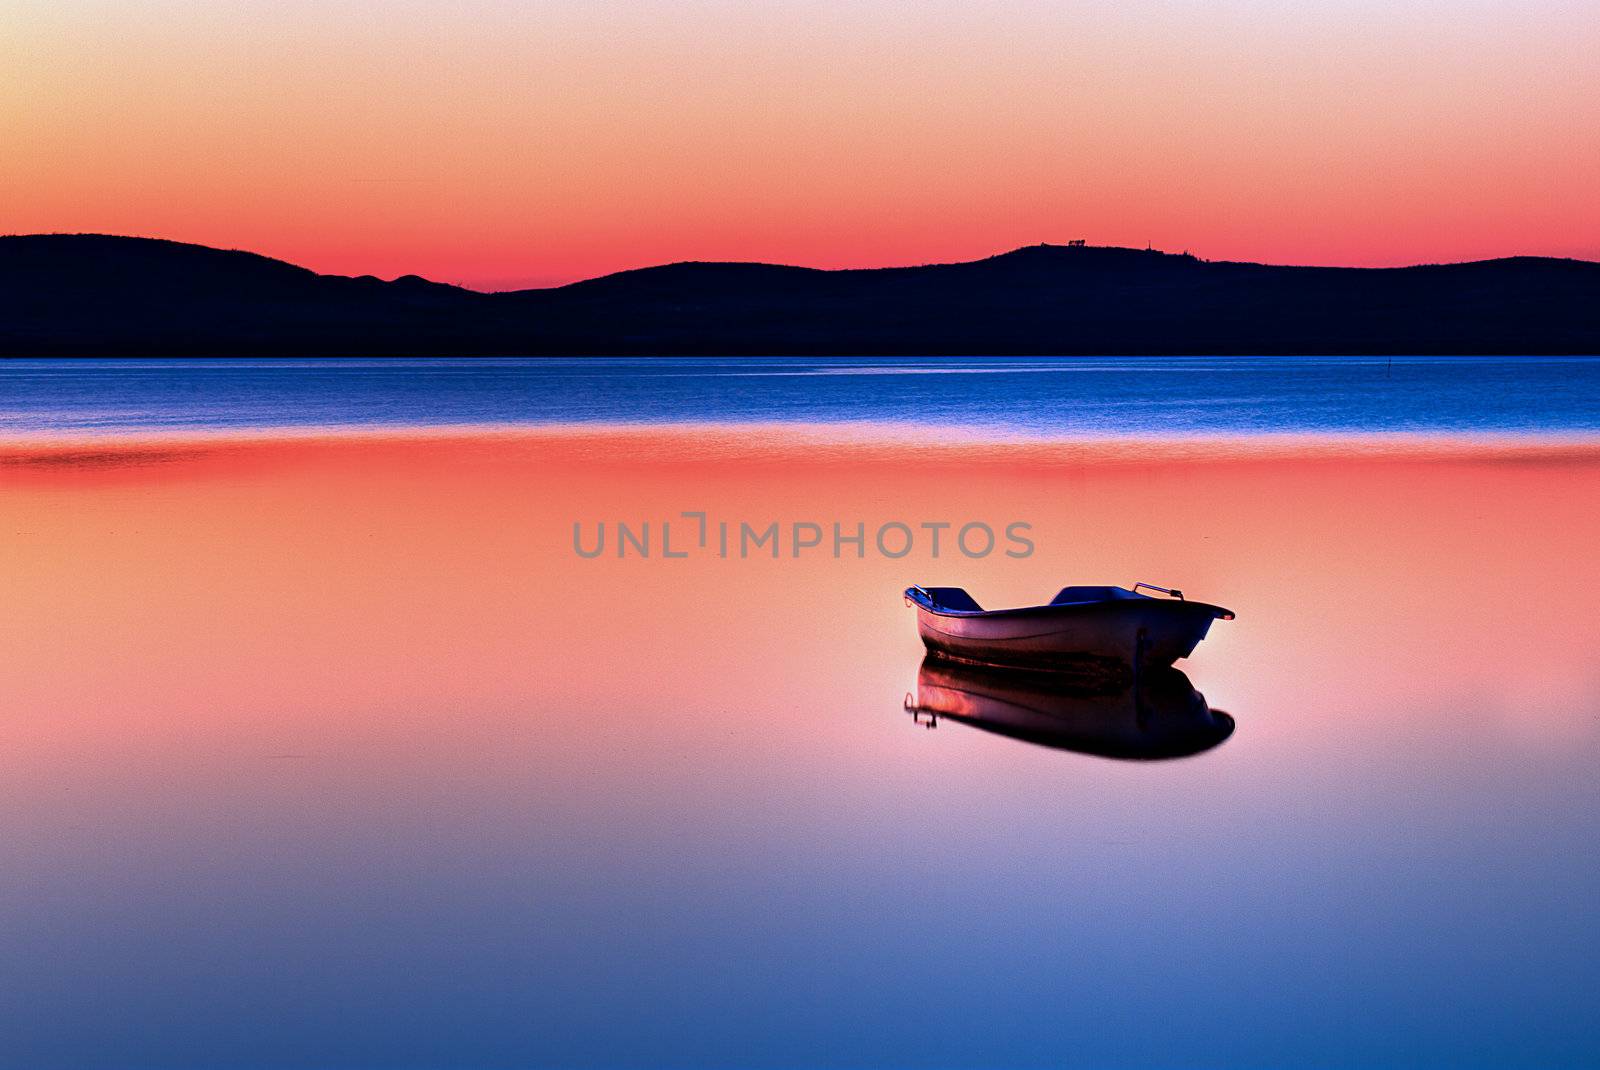 Scenic view of small fishing boat in calm water at sunset with hills in the background.